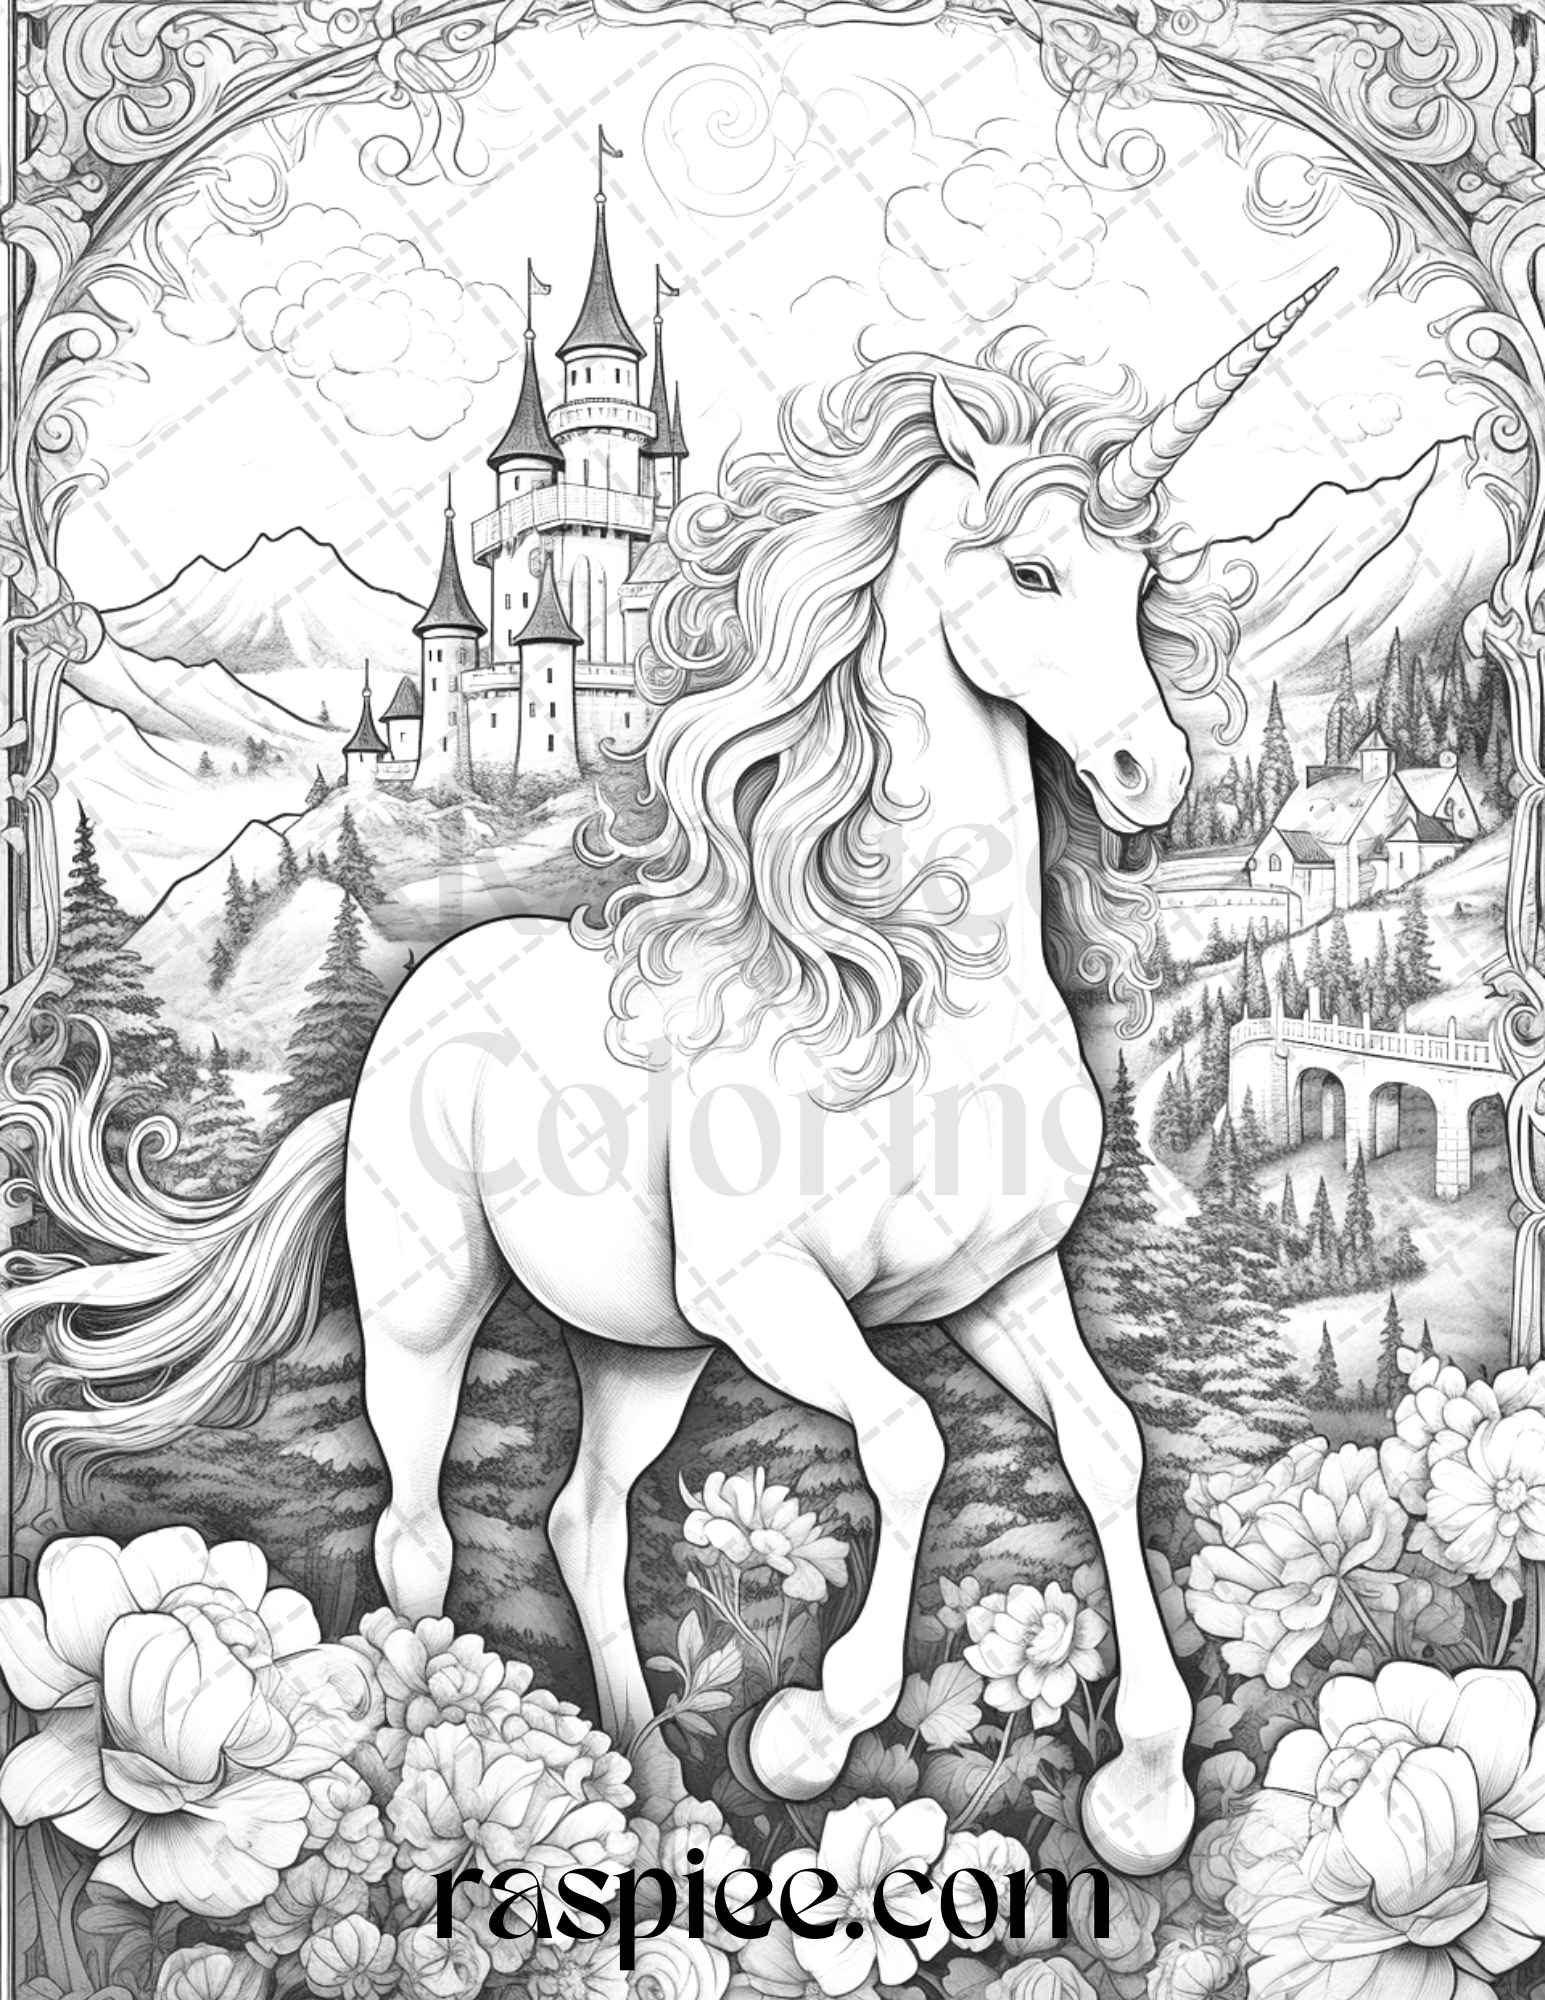 40 Enchanted Unicorns Grayscale Coloring Pages Printable for Adults, PDF File Instant Download - raspiee